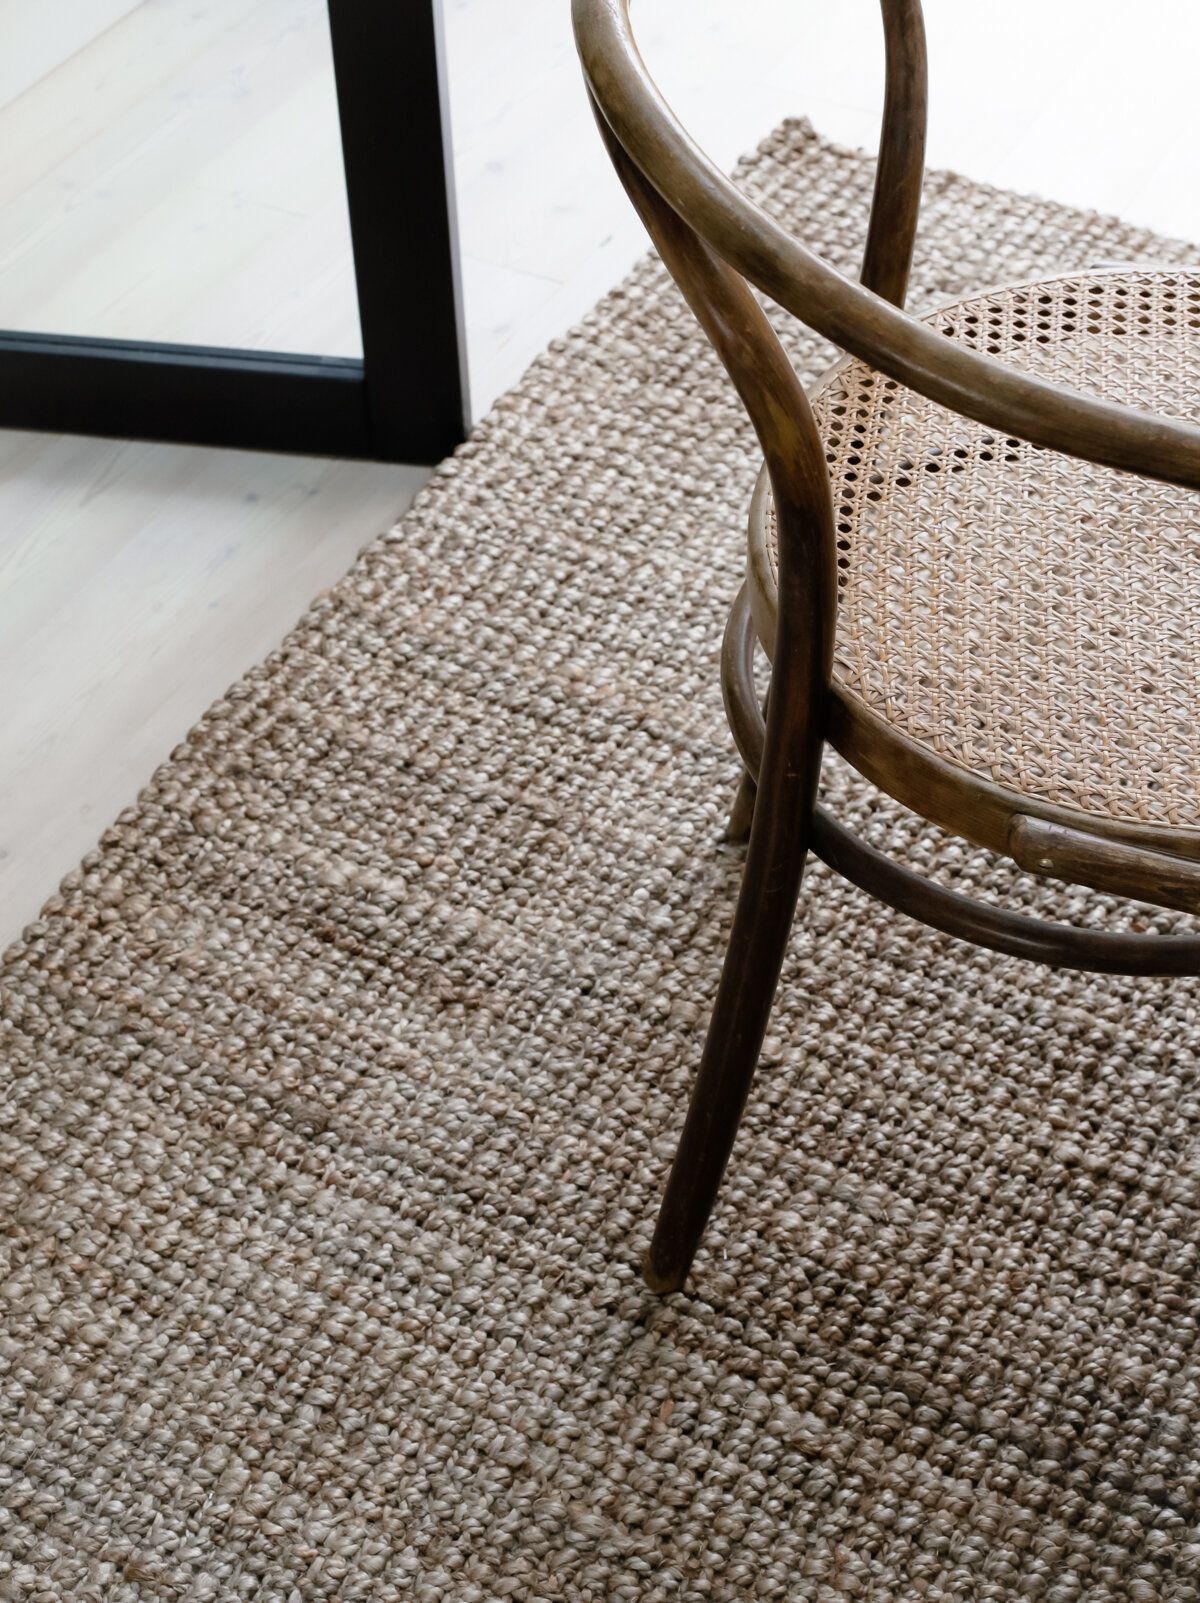 Jute Chairs: Sustainable and Stylish Seating Options for Your Home